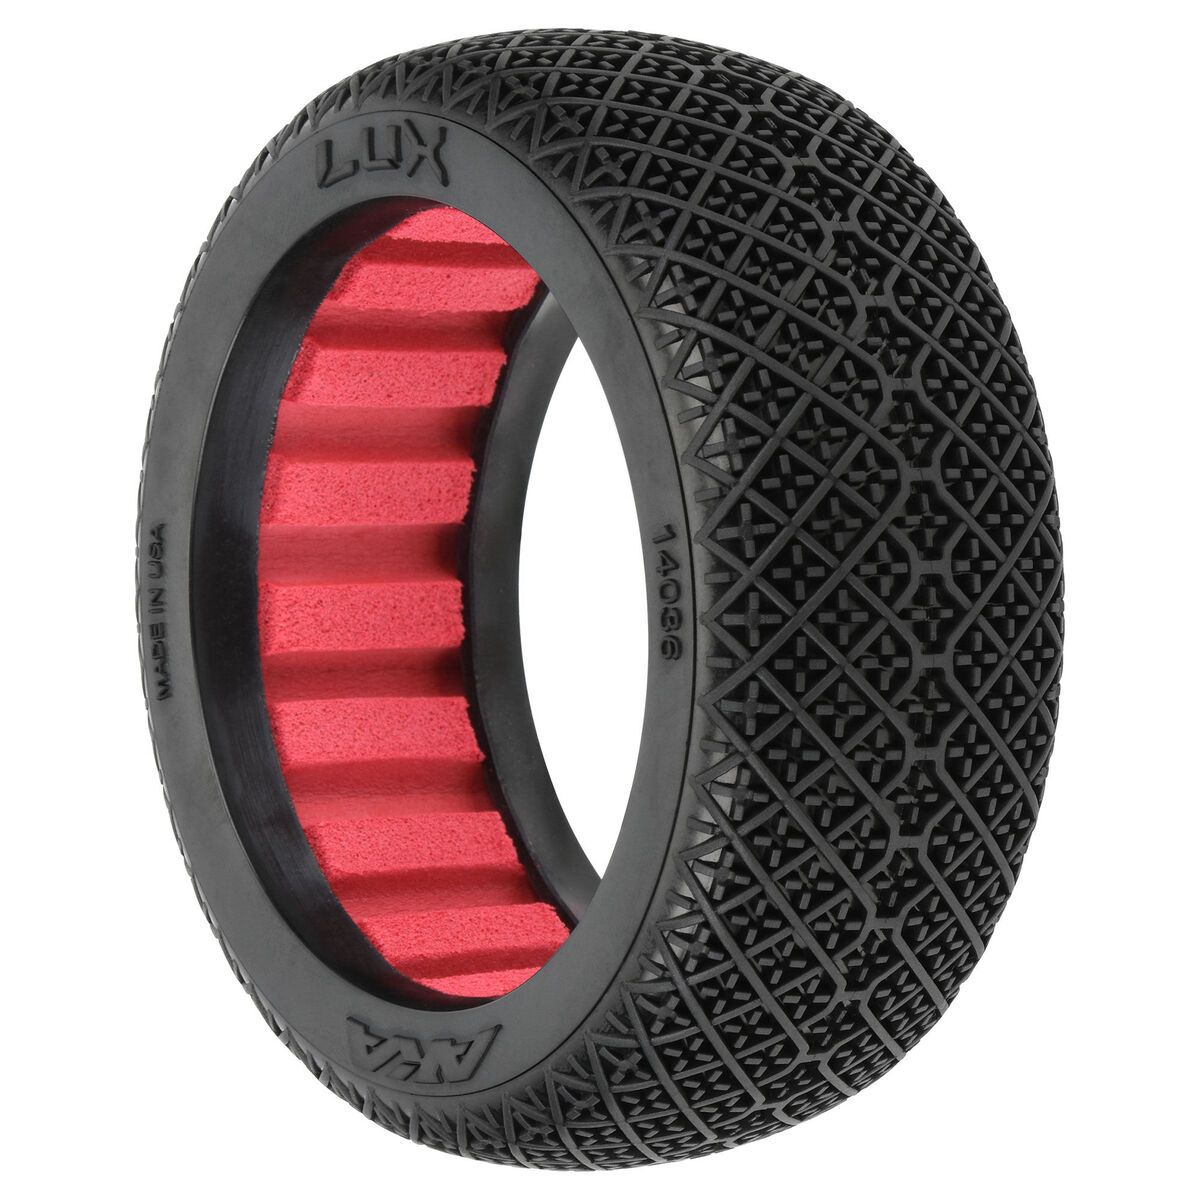 AKA Products, Inc. 14036XR 1:8 Lux X Front/Rear Off-Road Buggy Tires (Pack of 2)